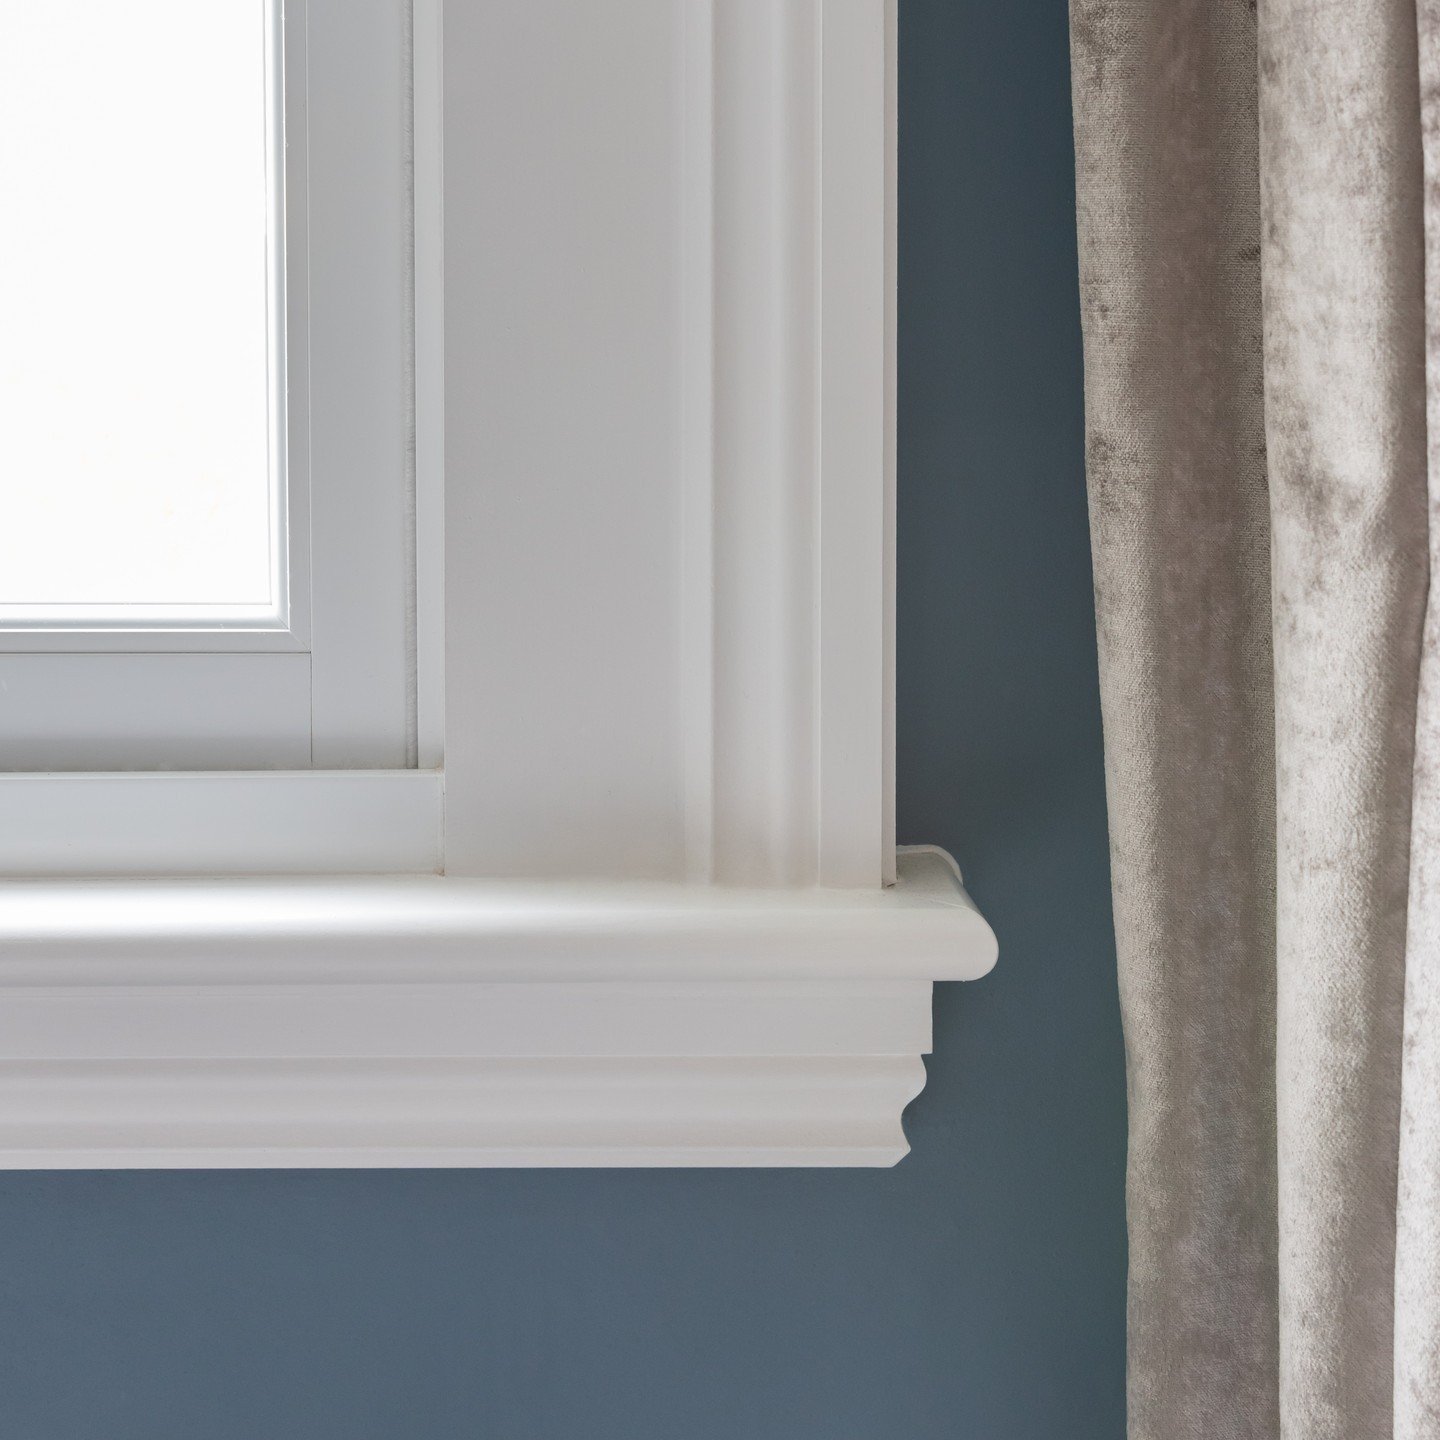 Every detail on our handcrafted sash windows tells a story of skill and artistry. Our sash windows are more than just fixtures &ndash; they're a testament to the design and finesse behind every curve and joint, every bead and frame. 

Come and visit 